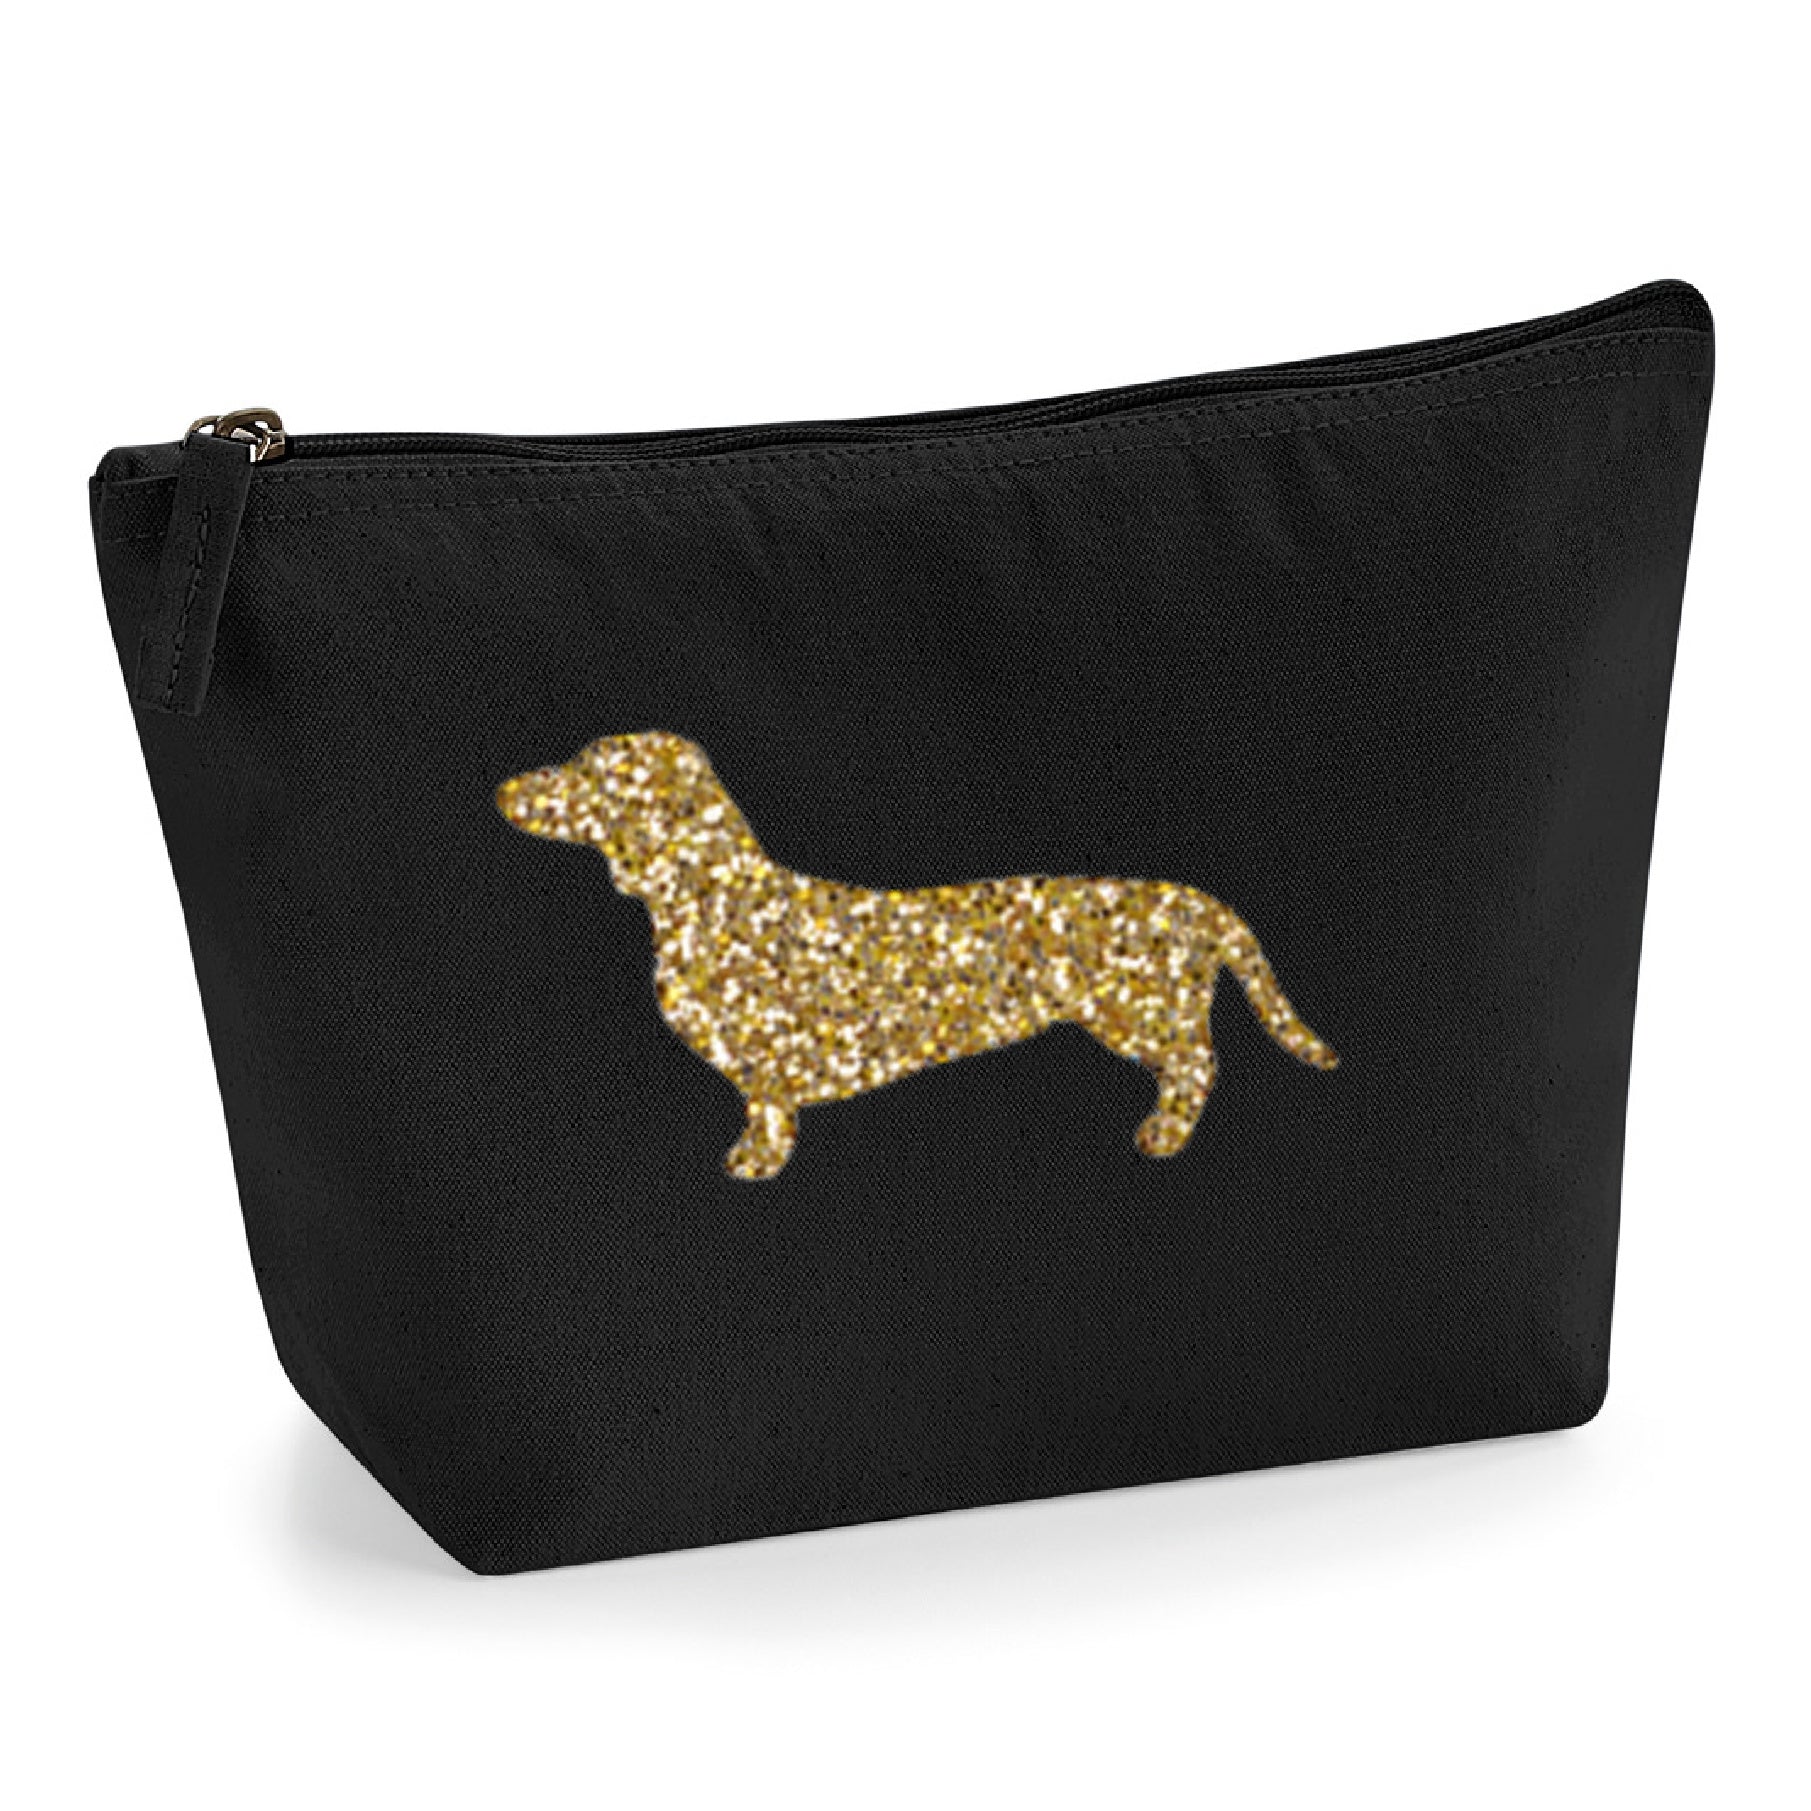 Dog Make Up Bag - Personalise with ANY Dog Breed - Organic Canvas